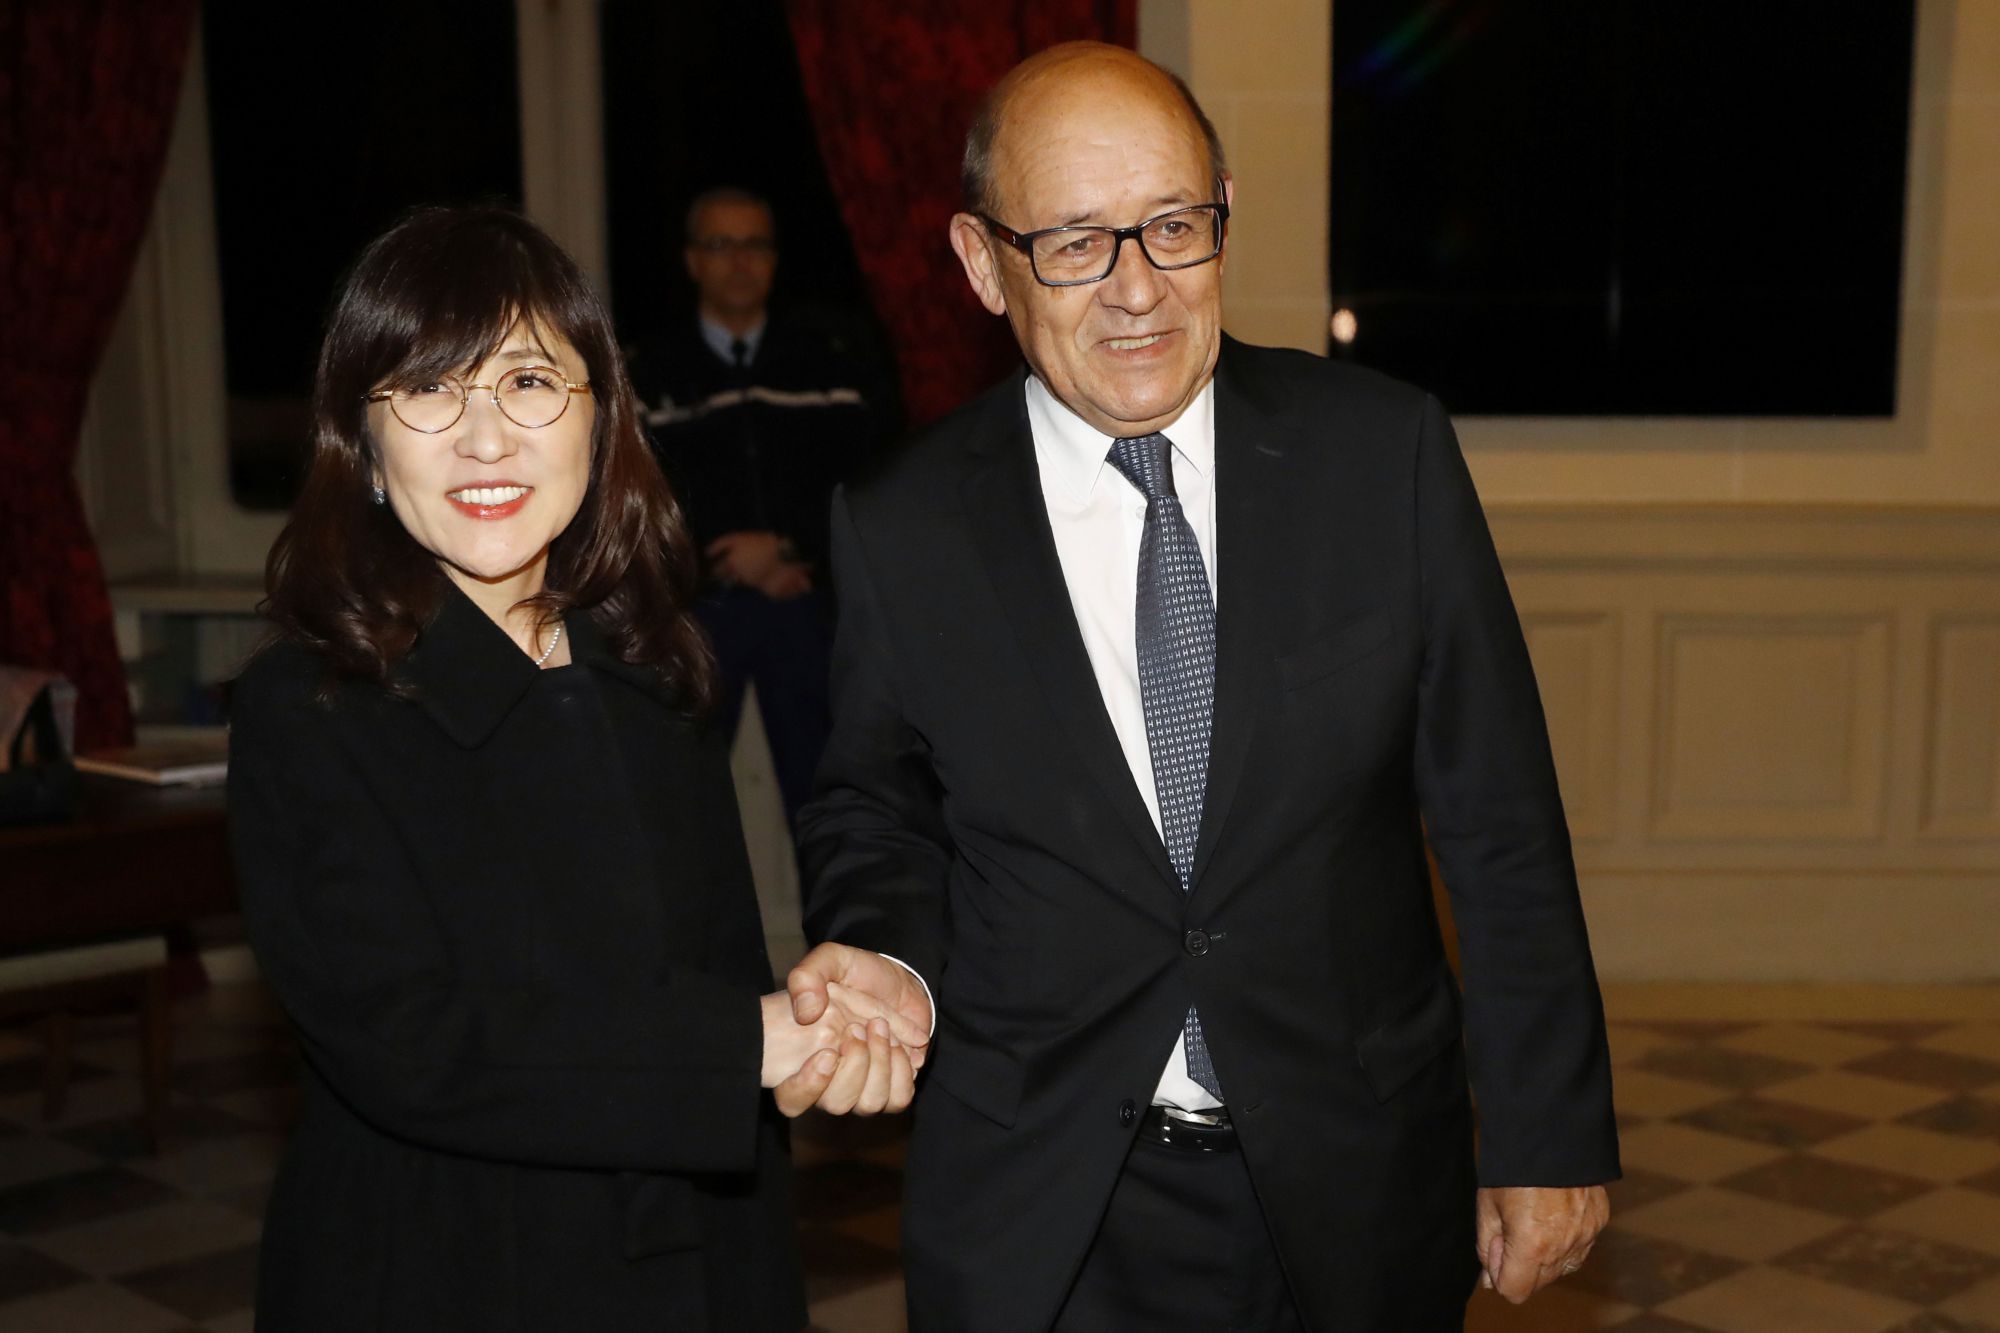 Defense Minister Tomomi Inada is welcomed by French Defense Minister Jean-Yves Le Drian ahead of talks in Paris on Friday. | AFP-JIJI